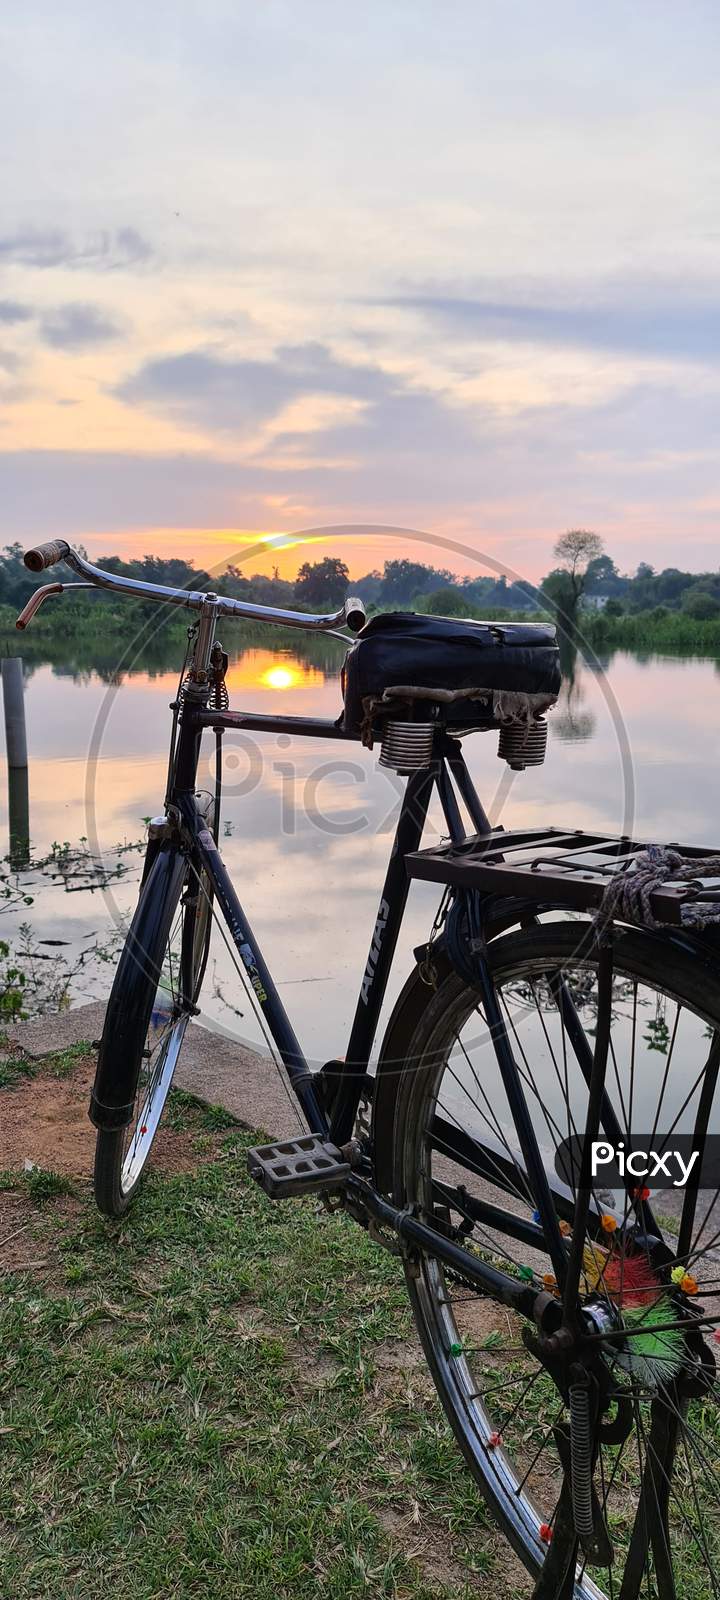 Bicycle with pond and sunset